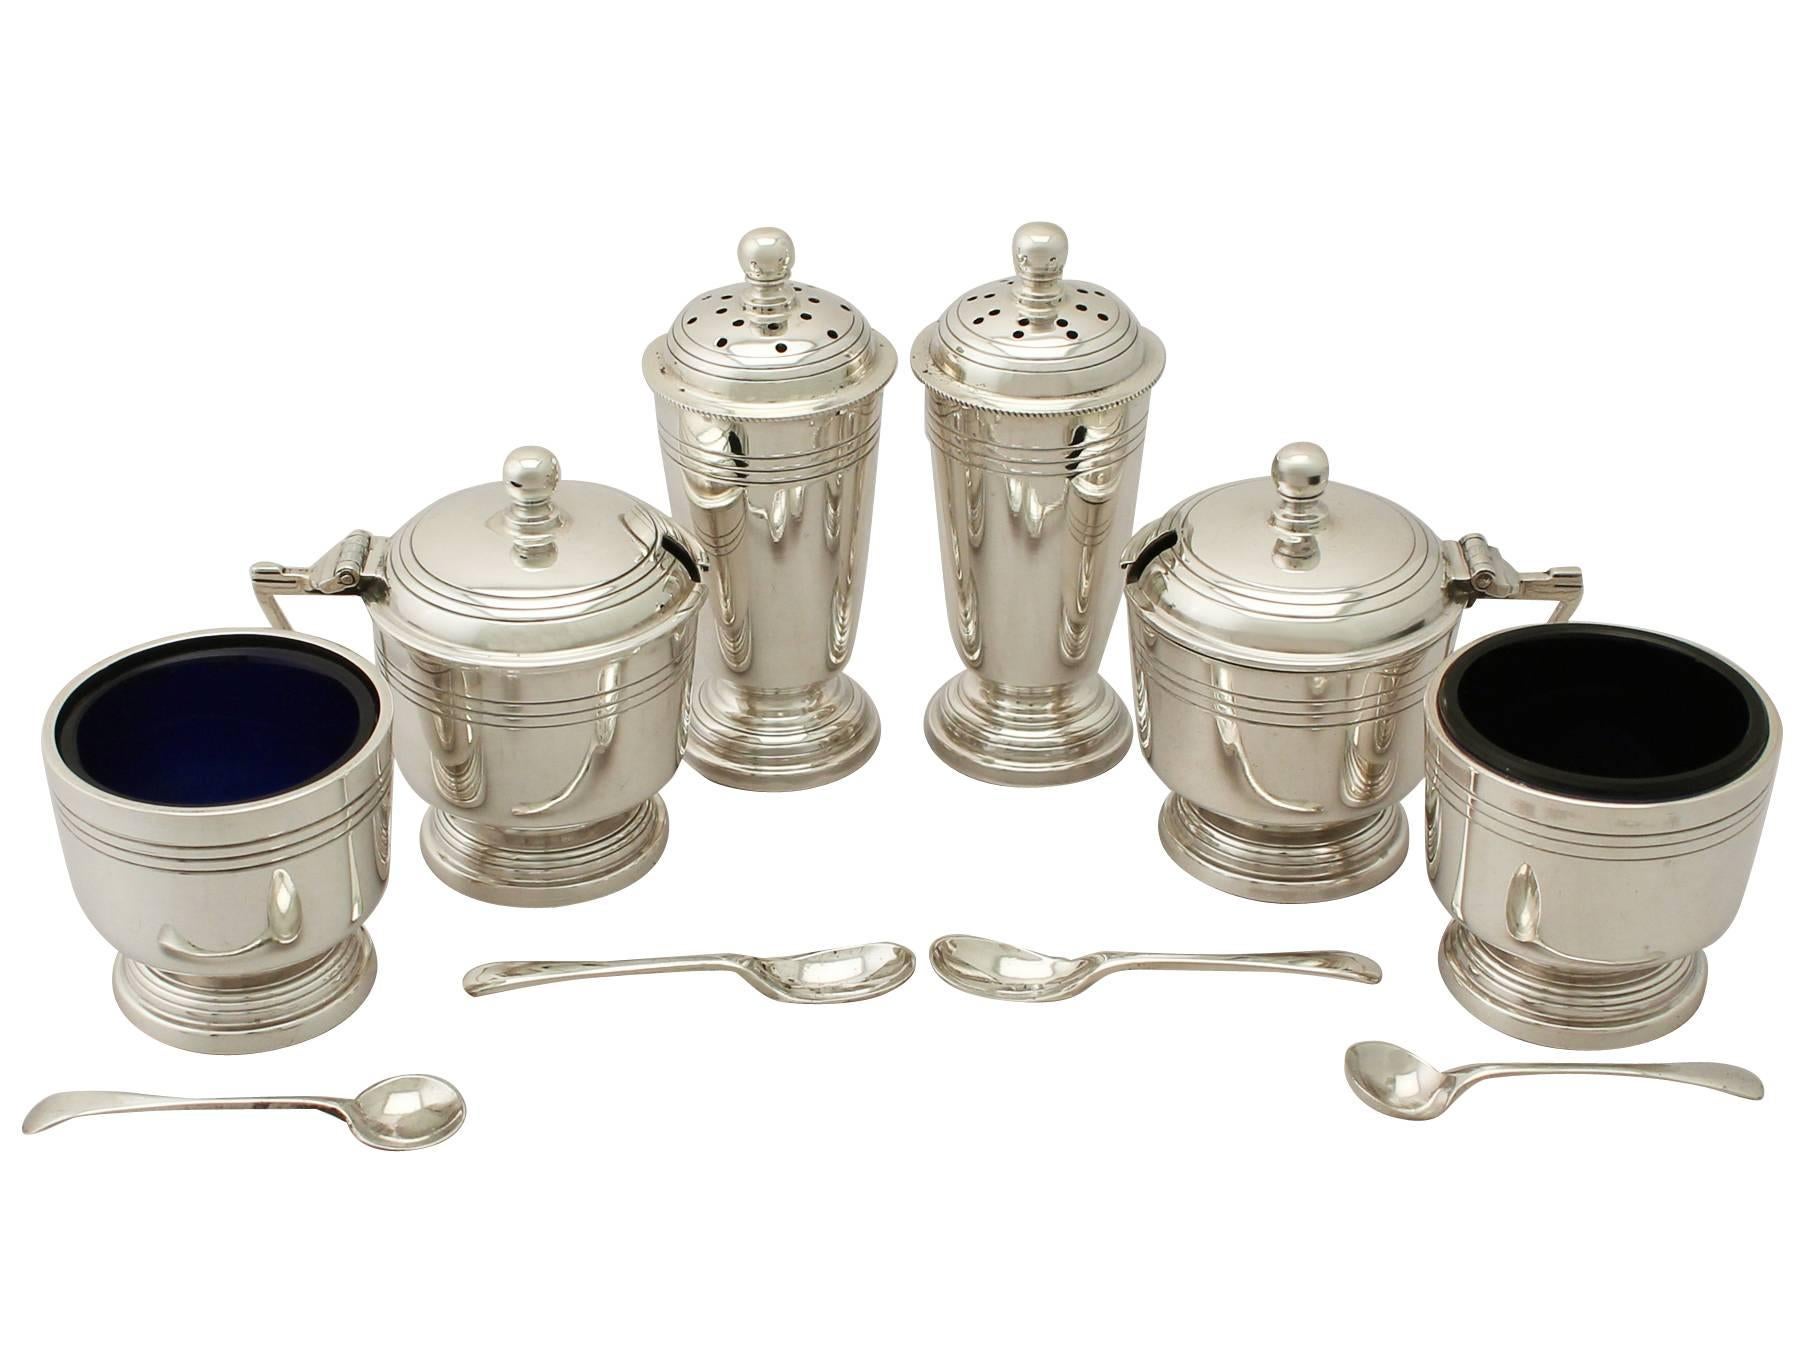 An exceptional, fine and impressive vintage Elizabeth II English sterling silver six-piece condiment set in the Art Deco style - boxed; an addition to our dining silverware collection.

This exceptional vintage Elizabeth II sterling silver six